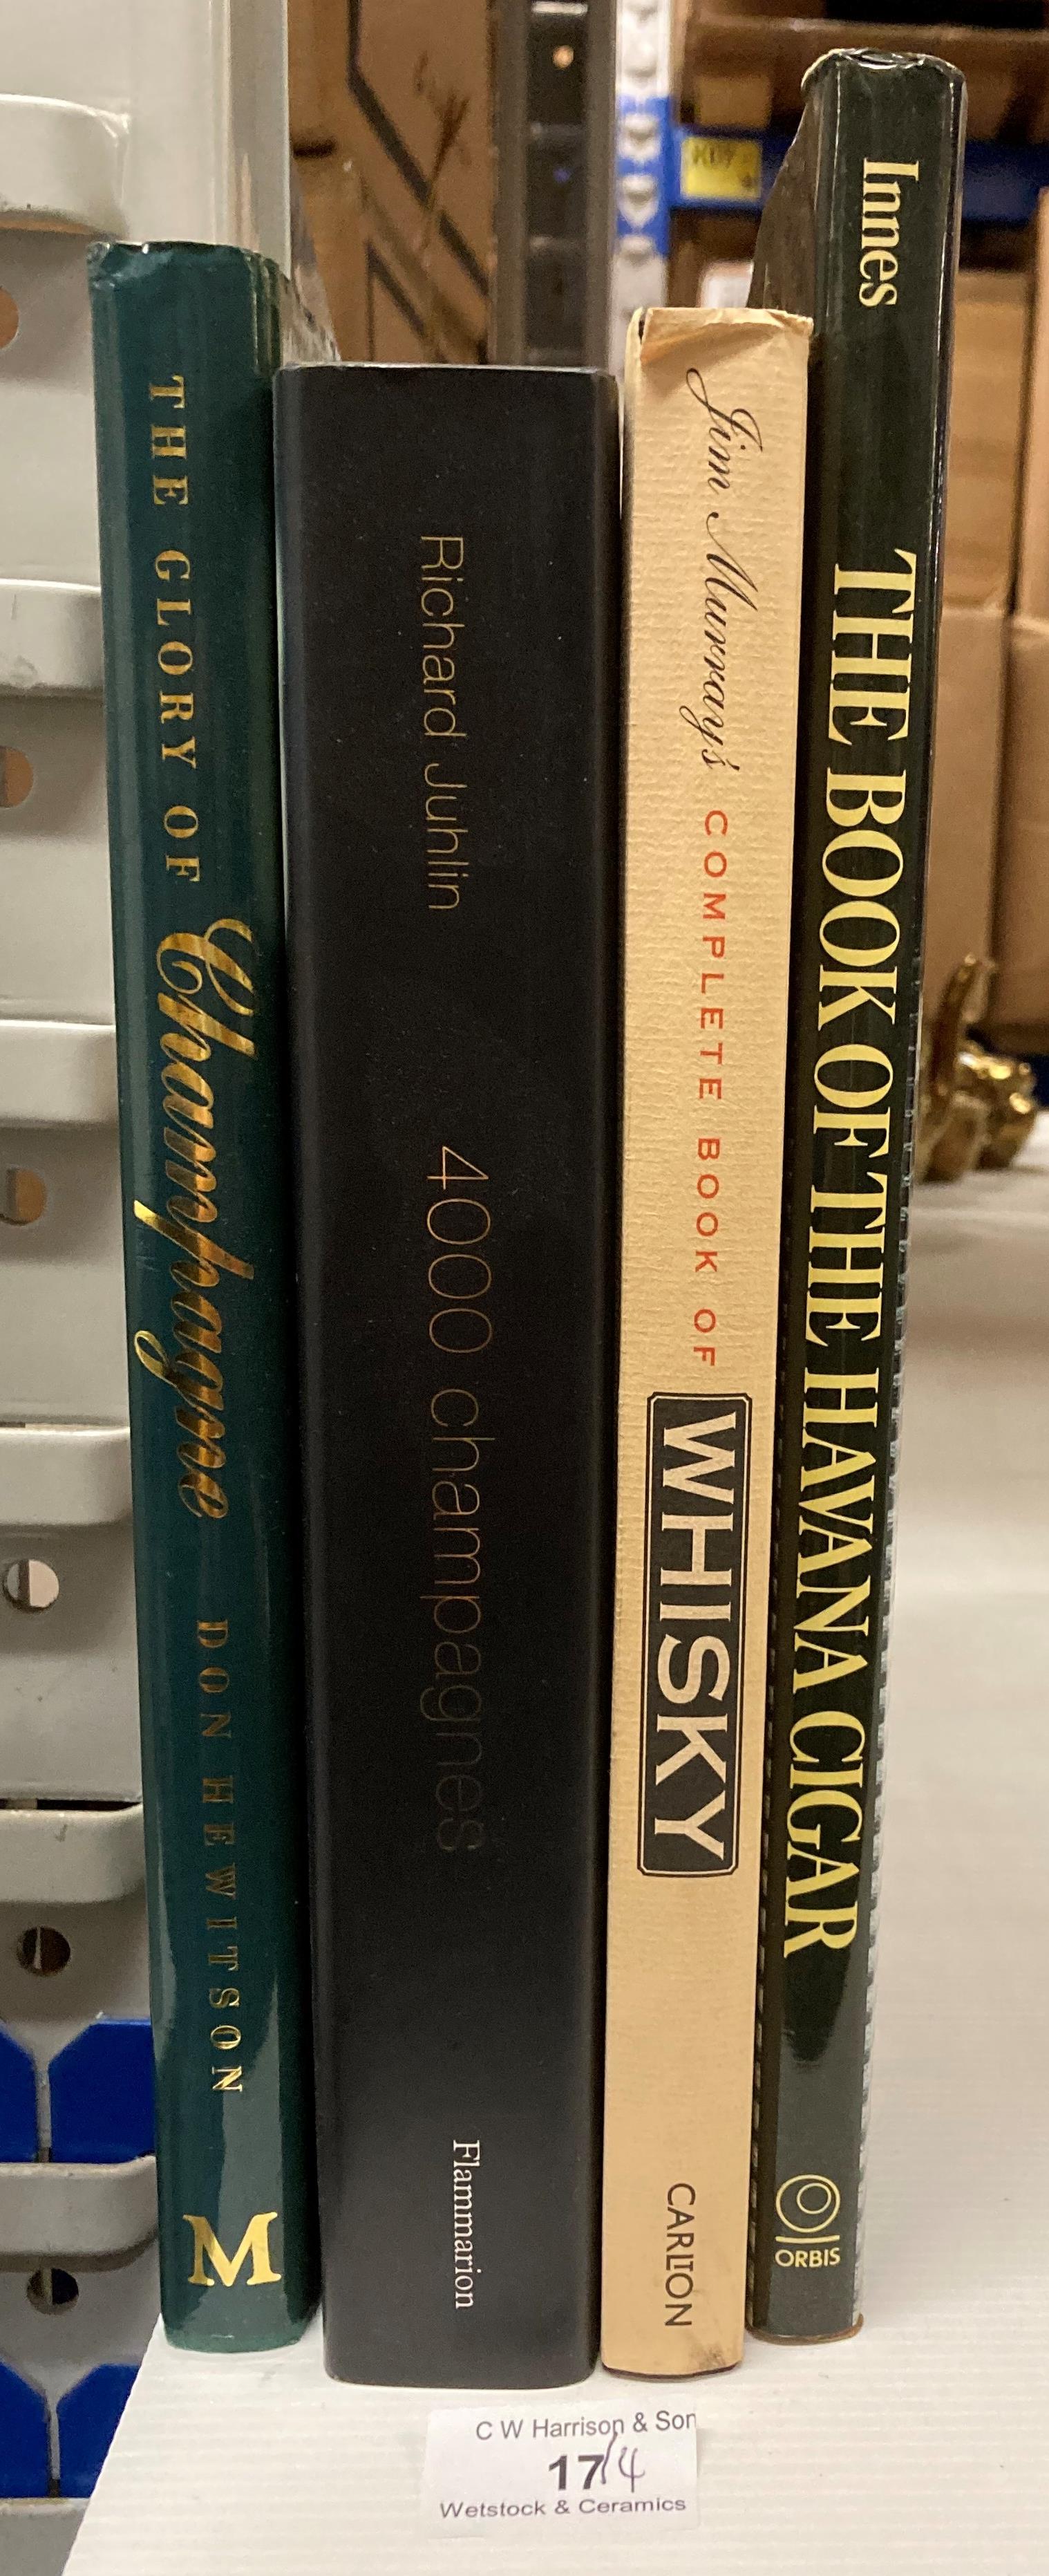 Four drink related books - Richard Juhlin '4000 Champagnes', Don Hewitson 'The Glory of Champagne',